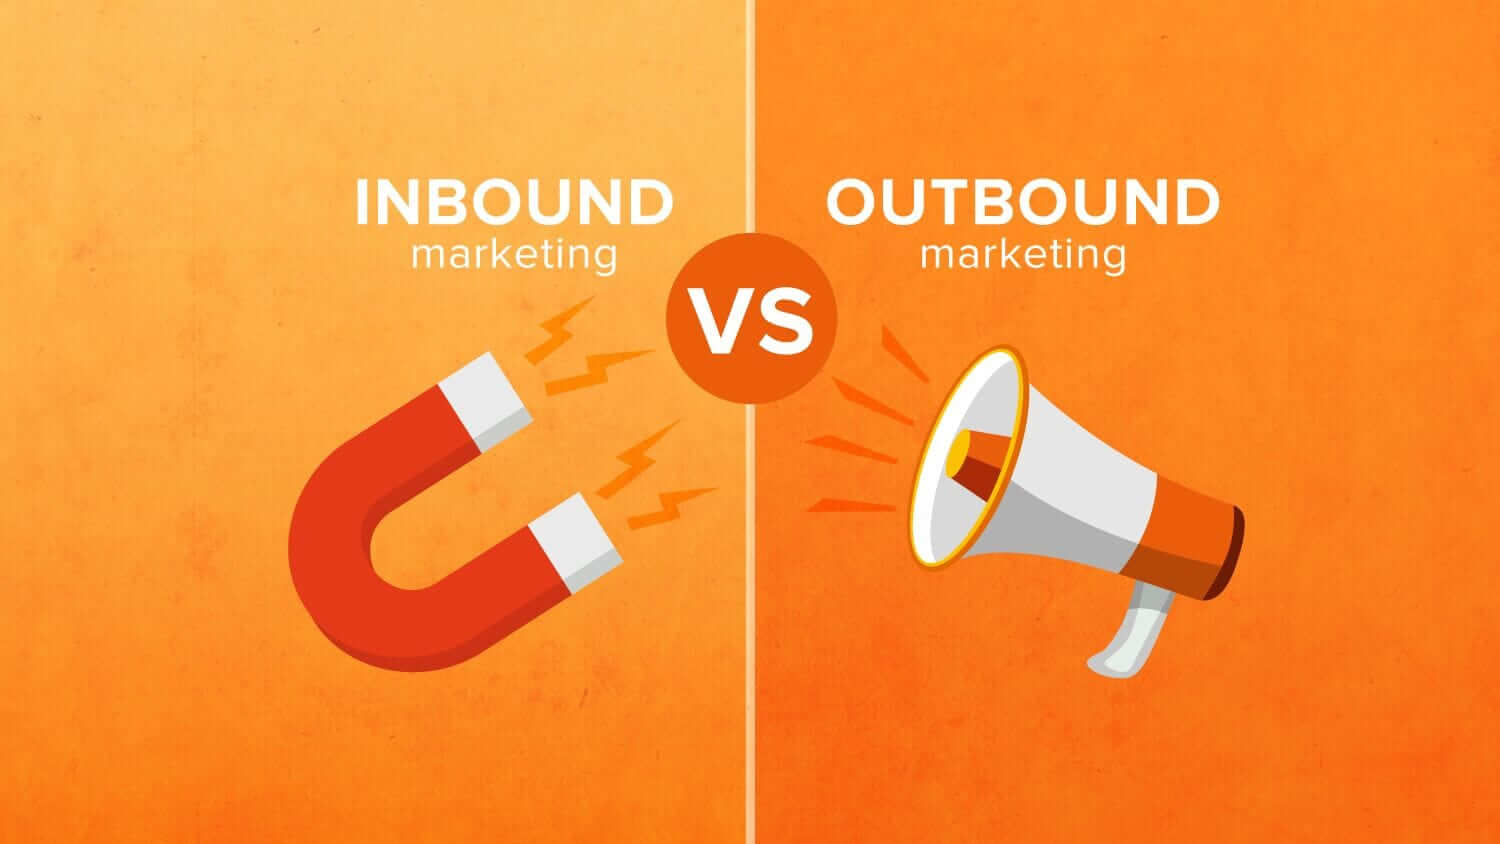 The key difference between inbound and outbound marketing is that inbound marketing is about attracting customers, while outbound marketing is about reaching customers